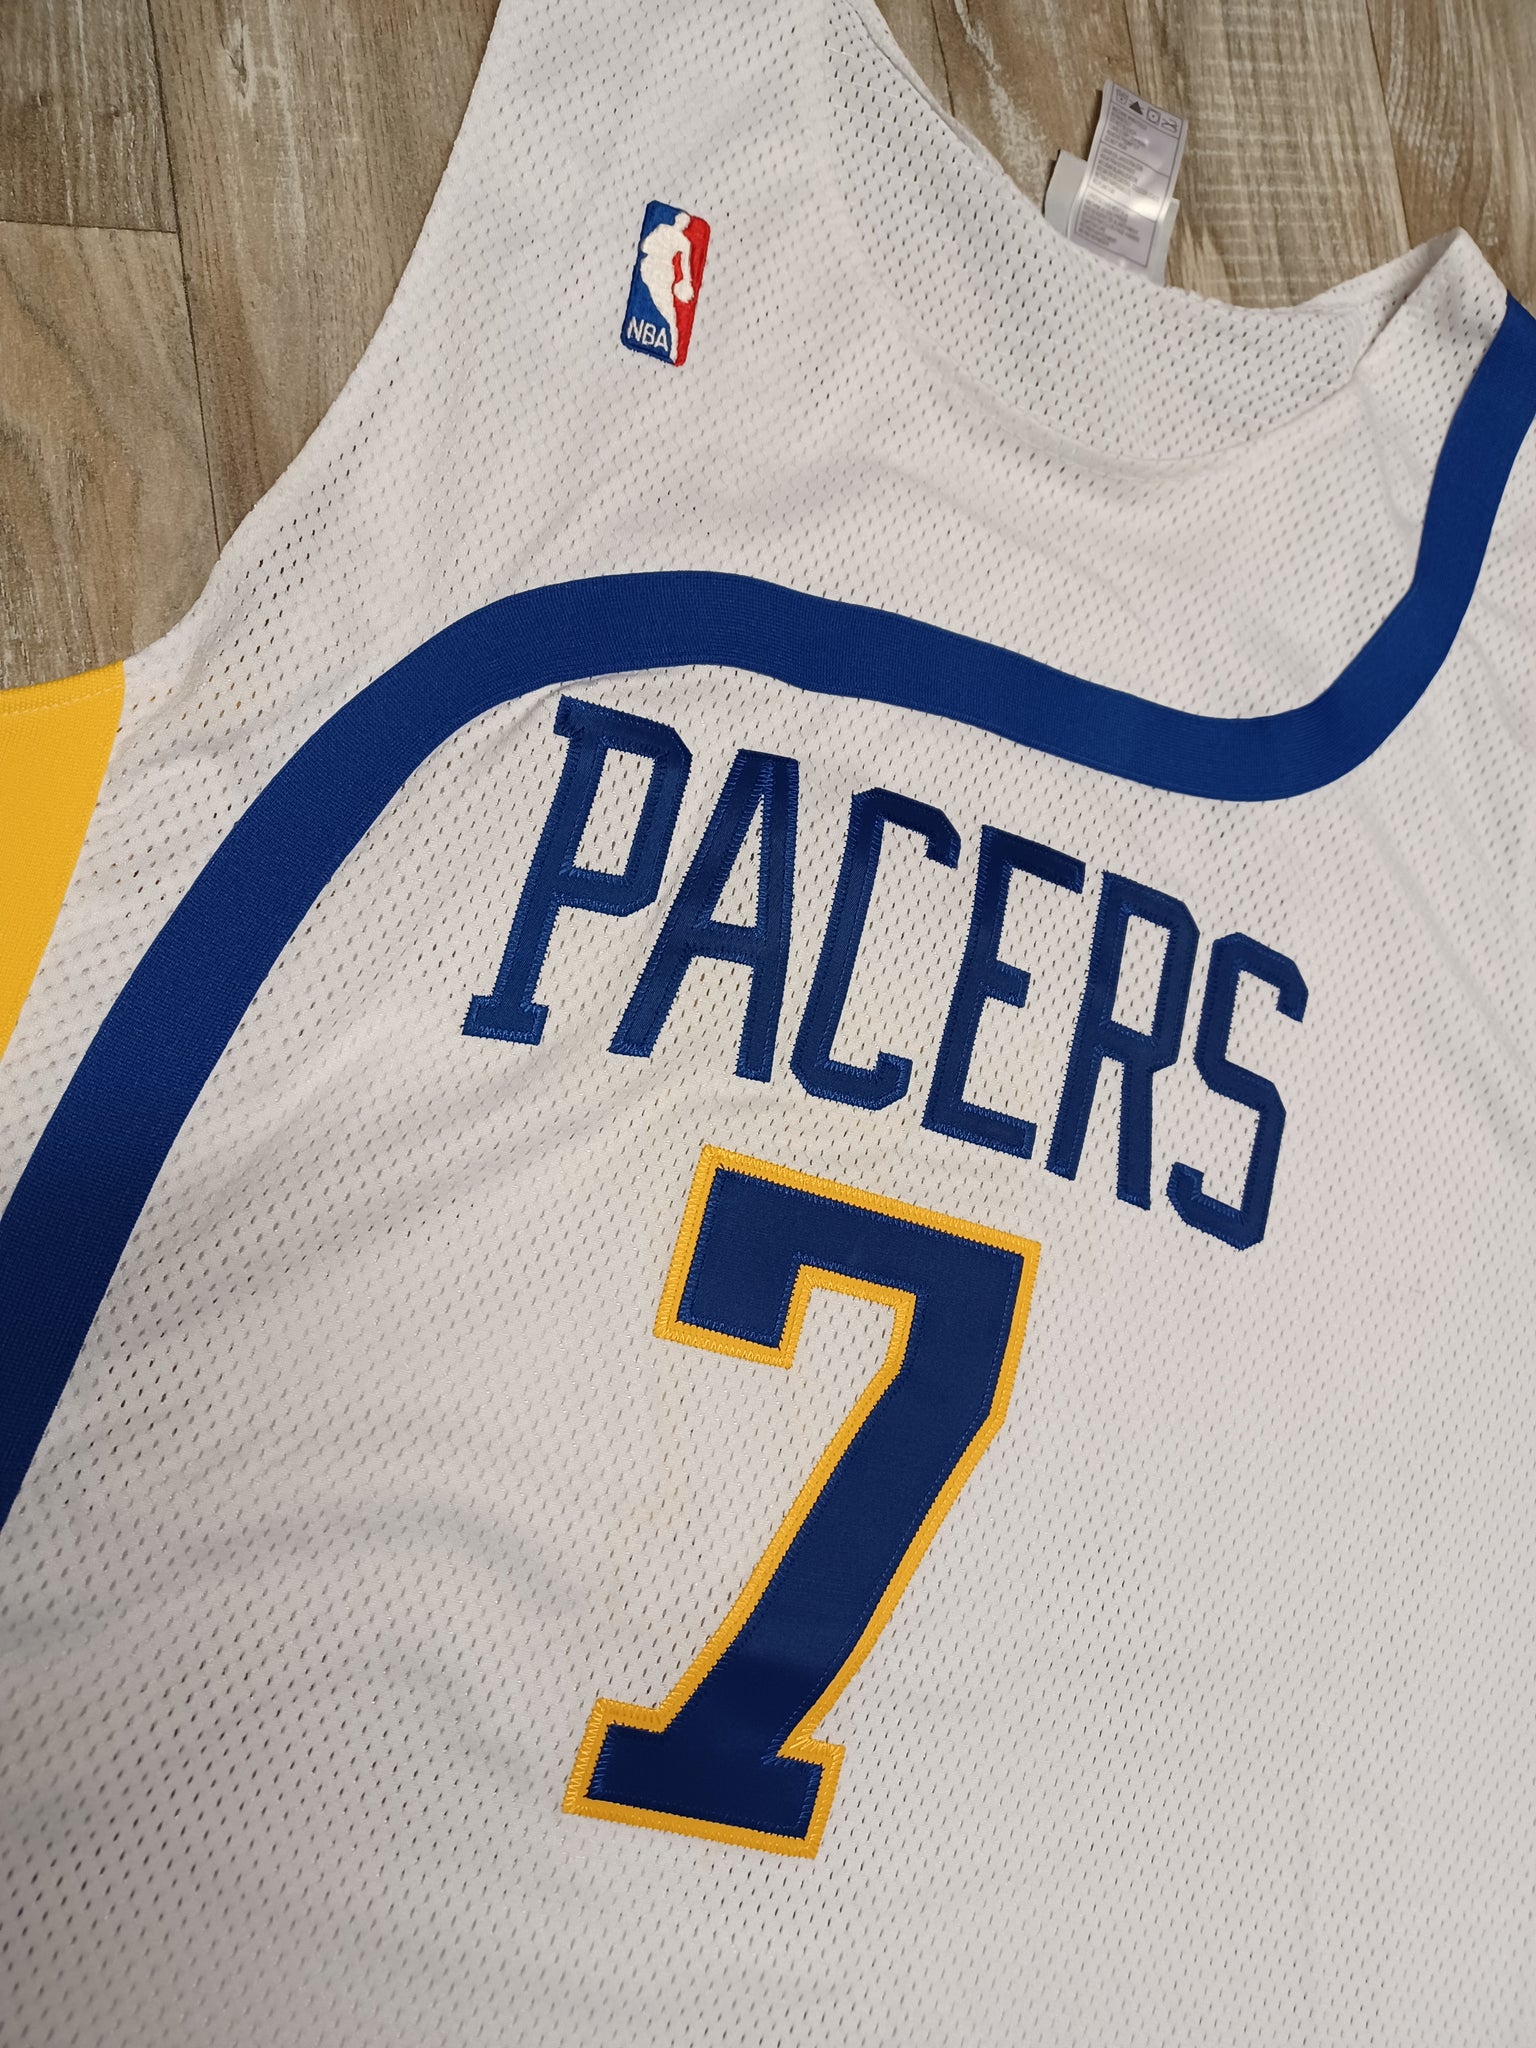 Jermaine O'Neal #7 Indiana Pacers Reebok Blue Jersey Youth